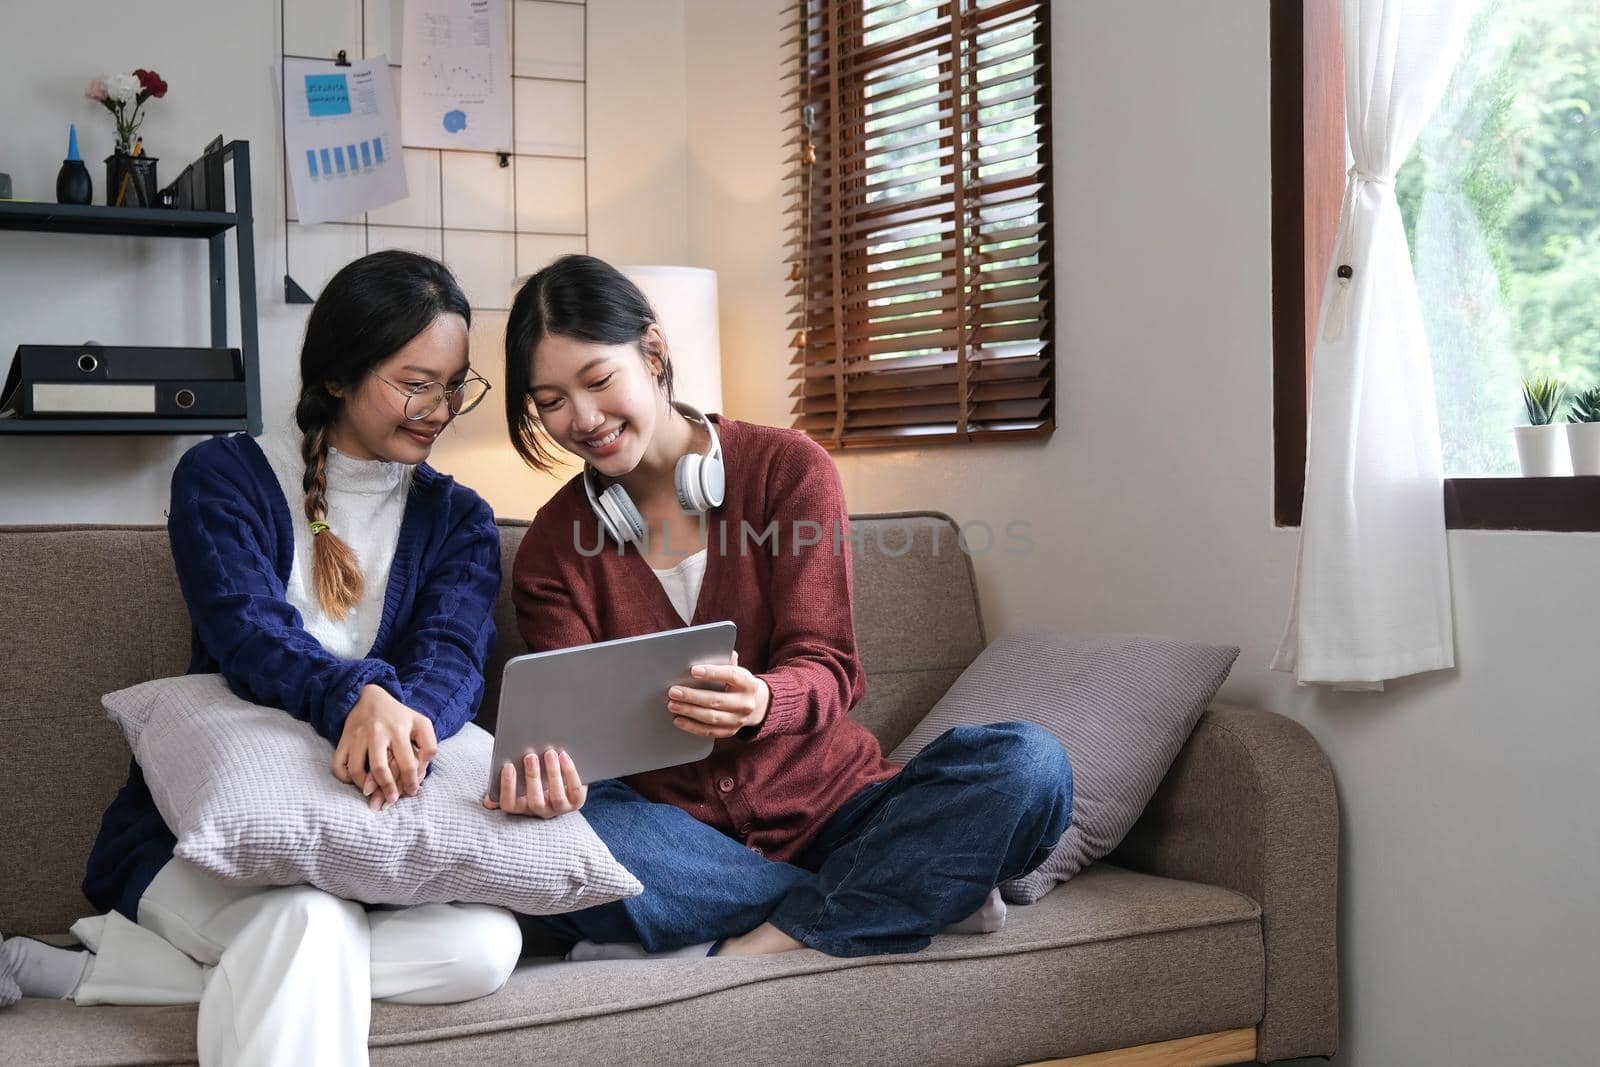 Asian beautiful lesbian women couple hugging girlfriend in living room. Attractive two female gay friend sitting on sofa in living room, feel happy and enjoy spending time together on holiday in house.